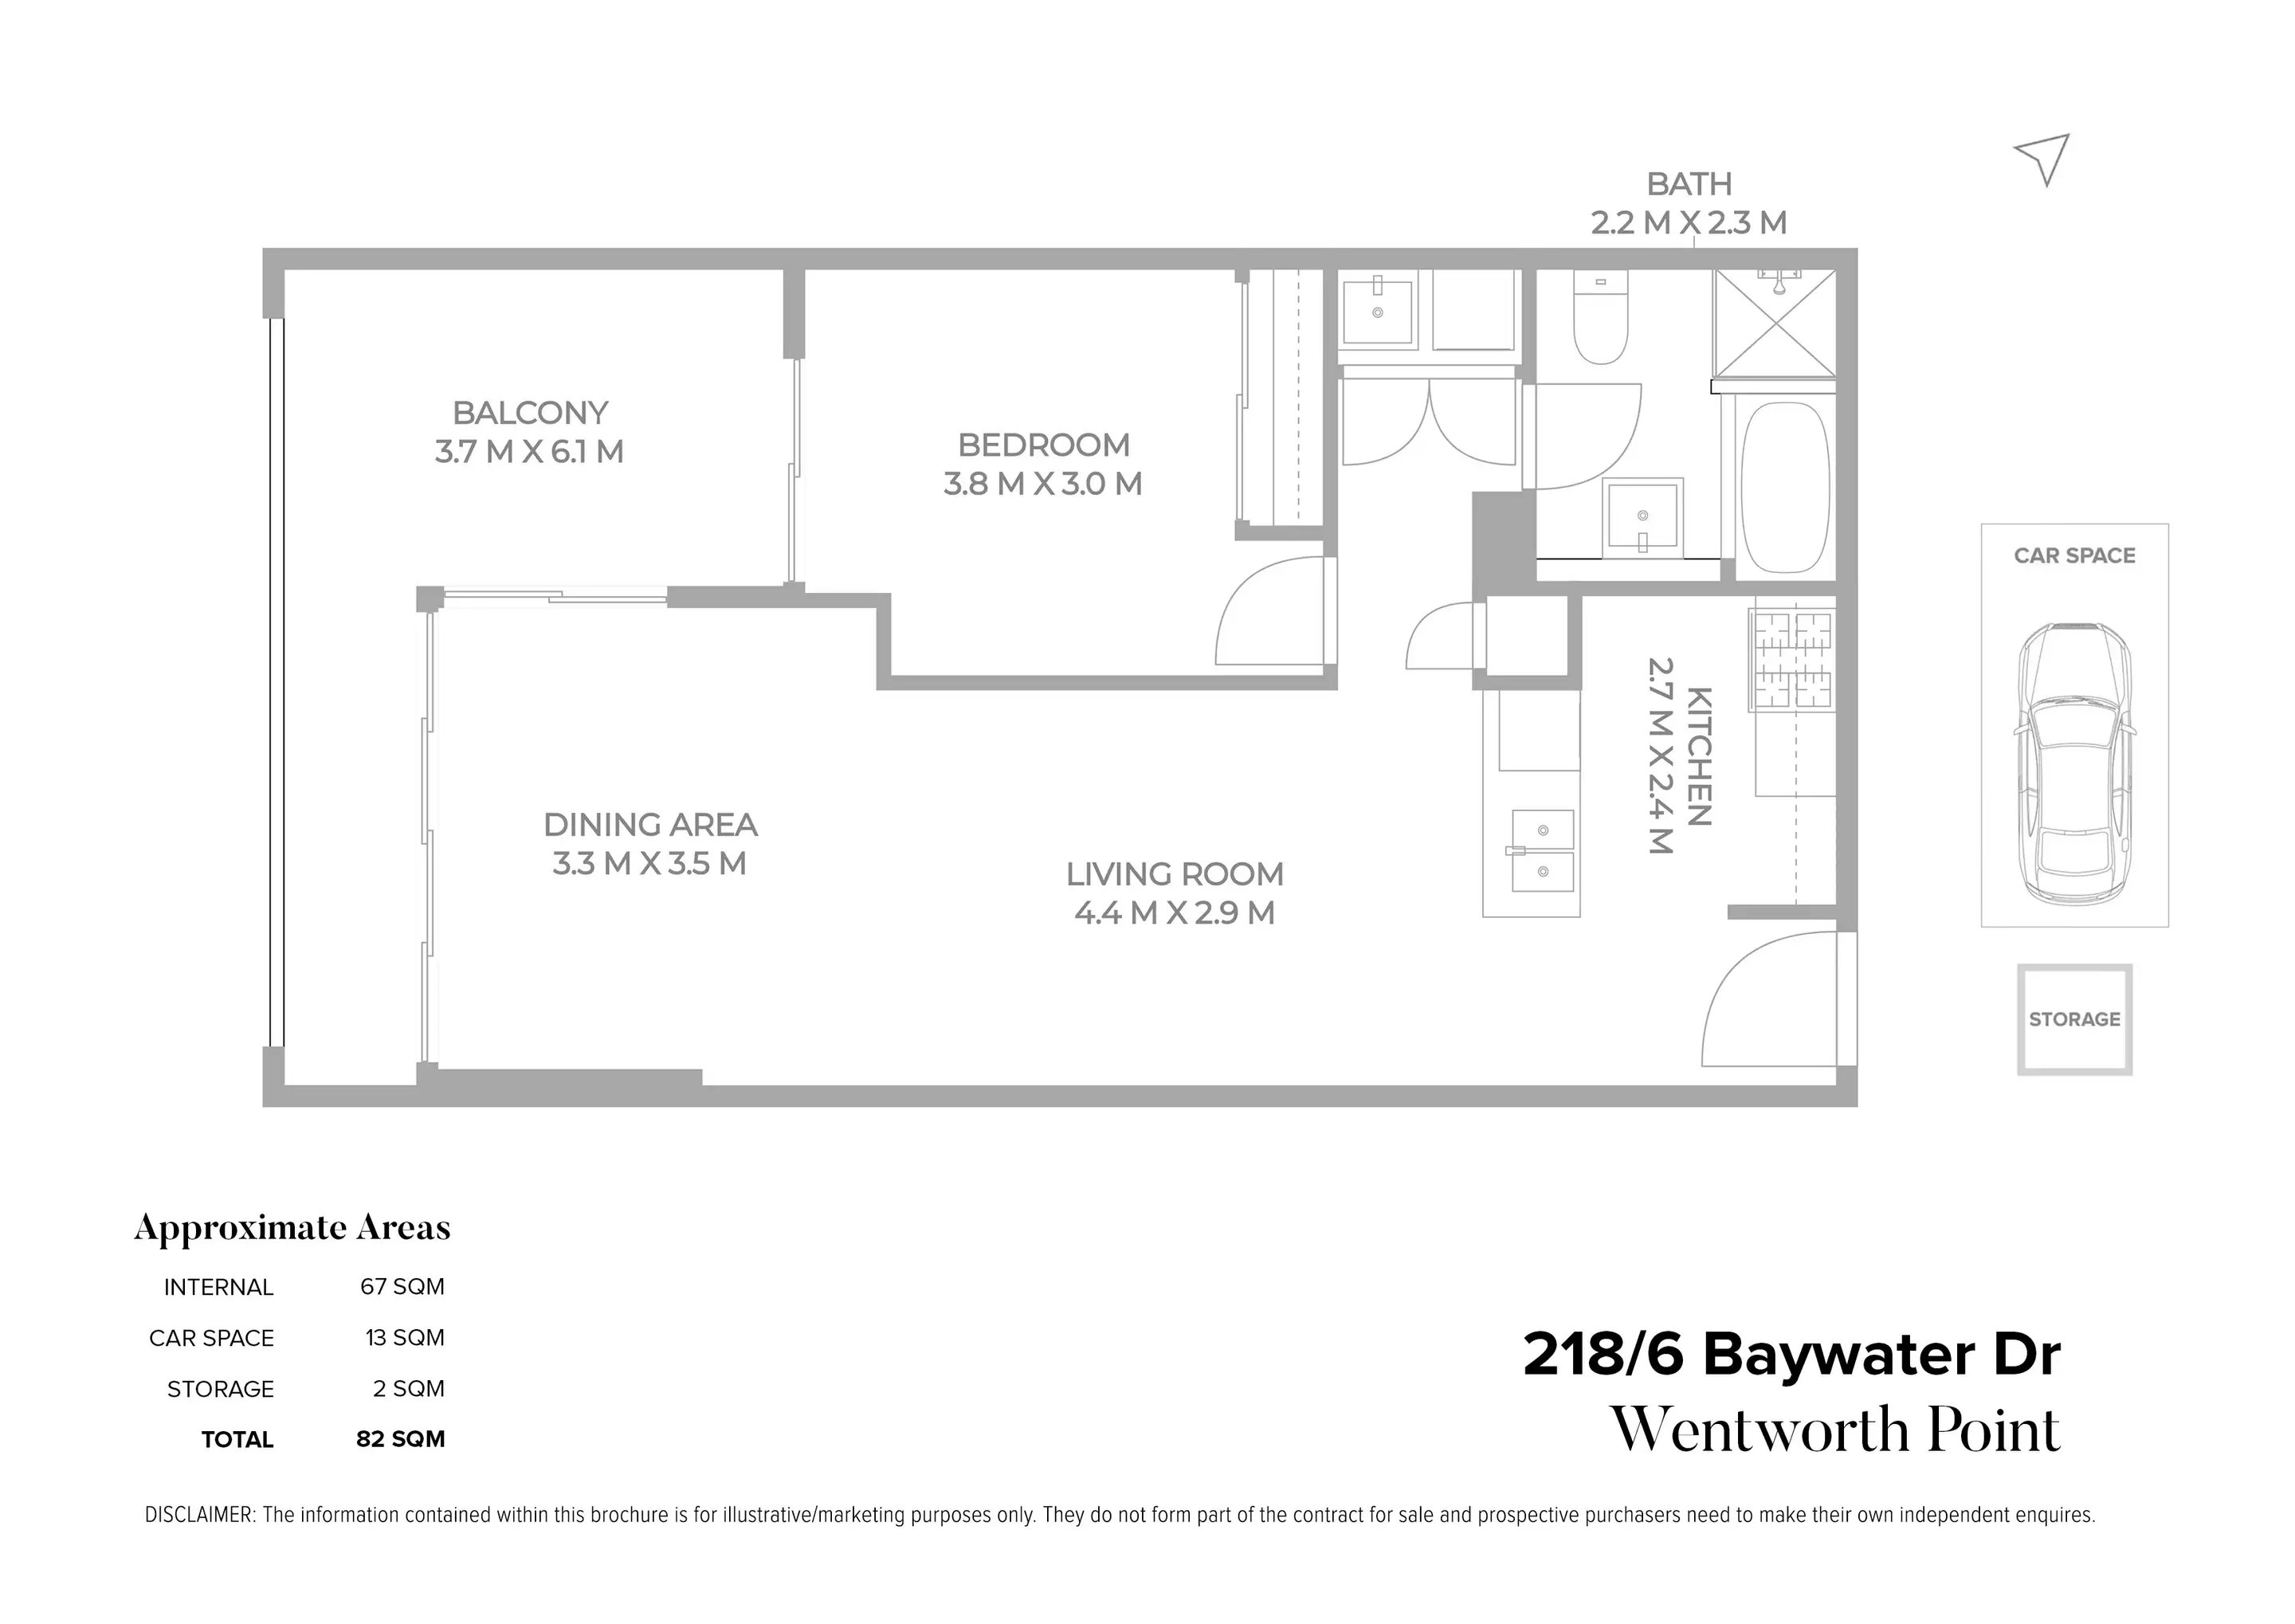 218/6 Baywater Drive, Wentworth Point Sold by Chidiac Realty - floorplan